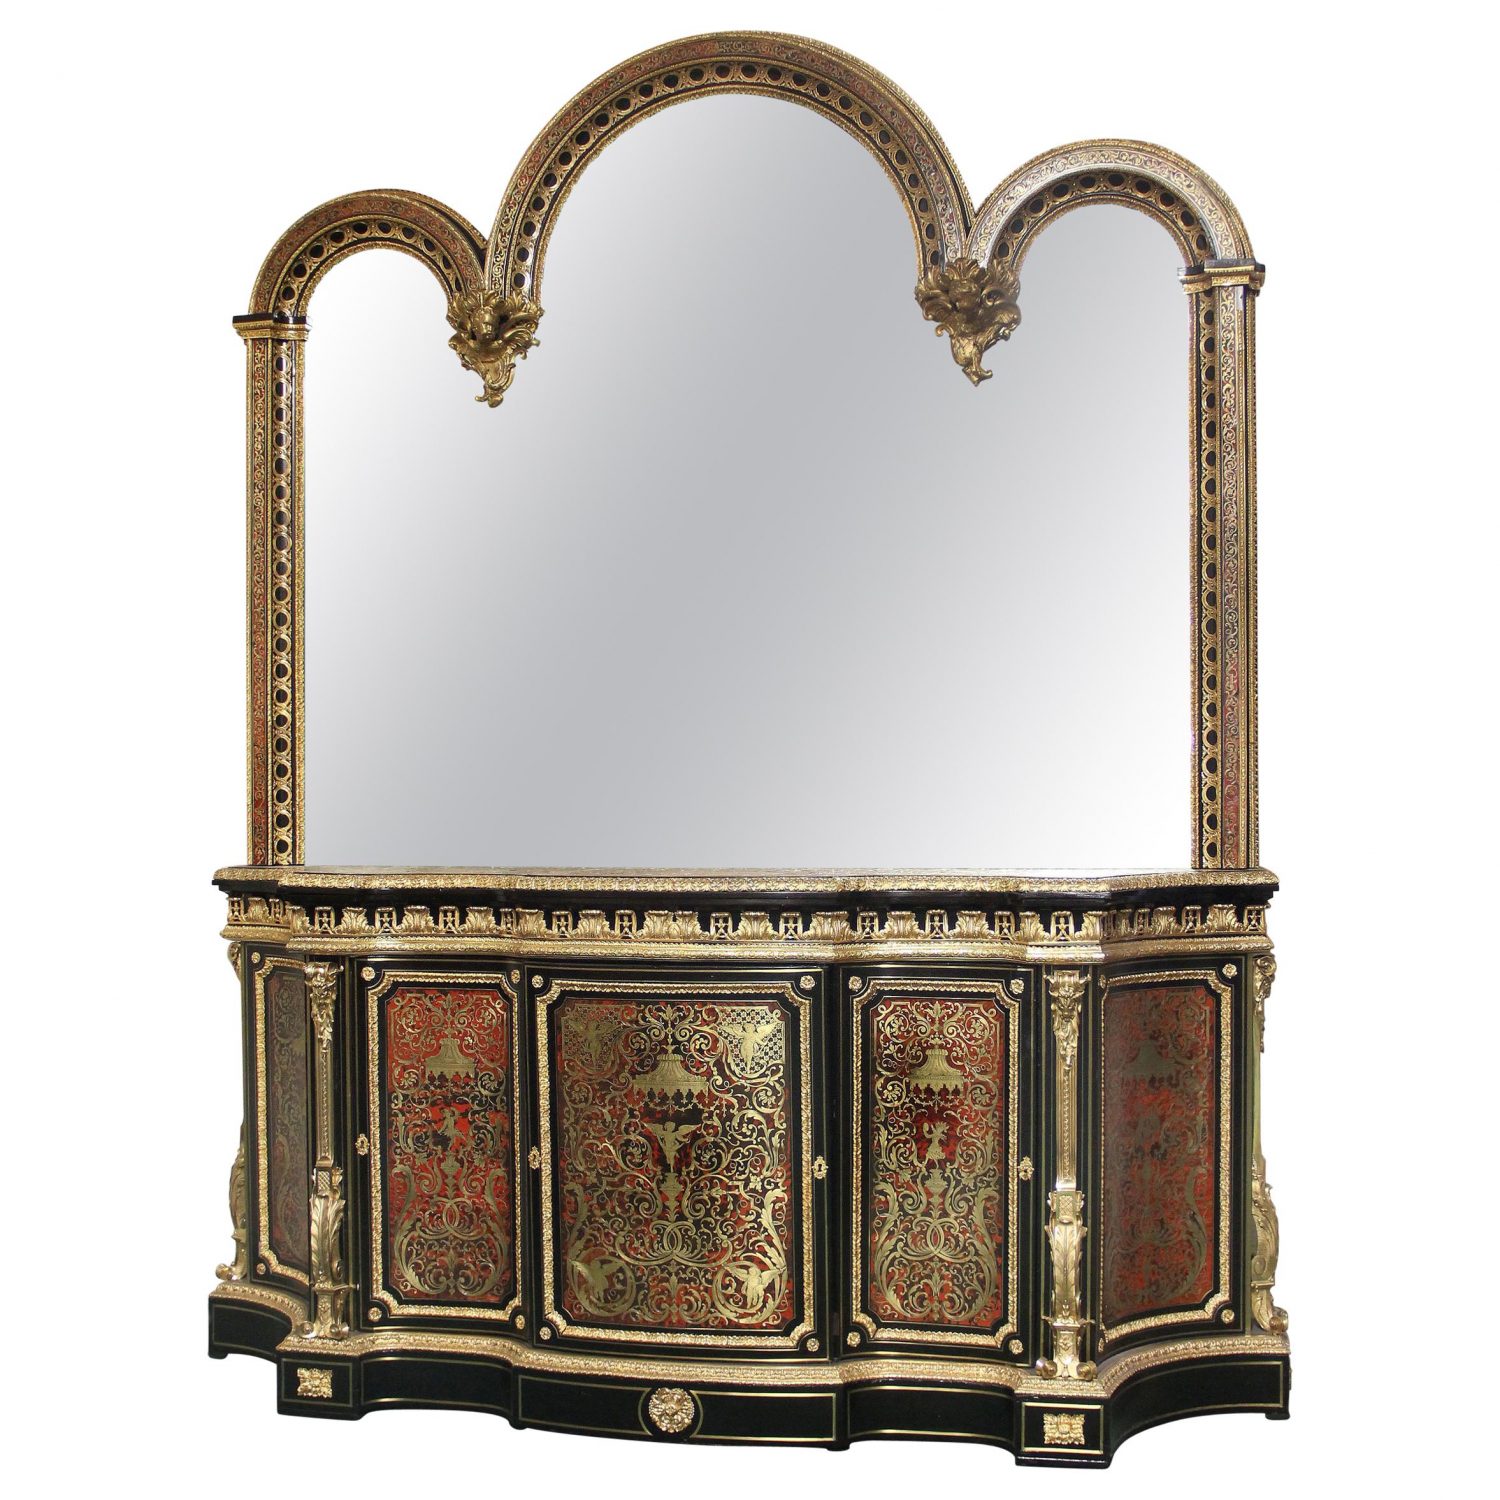 Mid to late 19th century Gilt bronze mounted ebony, red tortoiseshell and designed brass Boulle style cabinet with mirror.